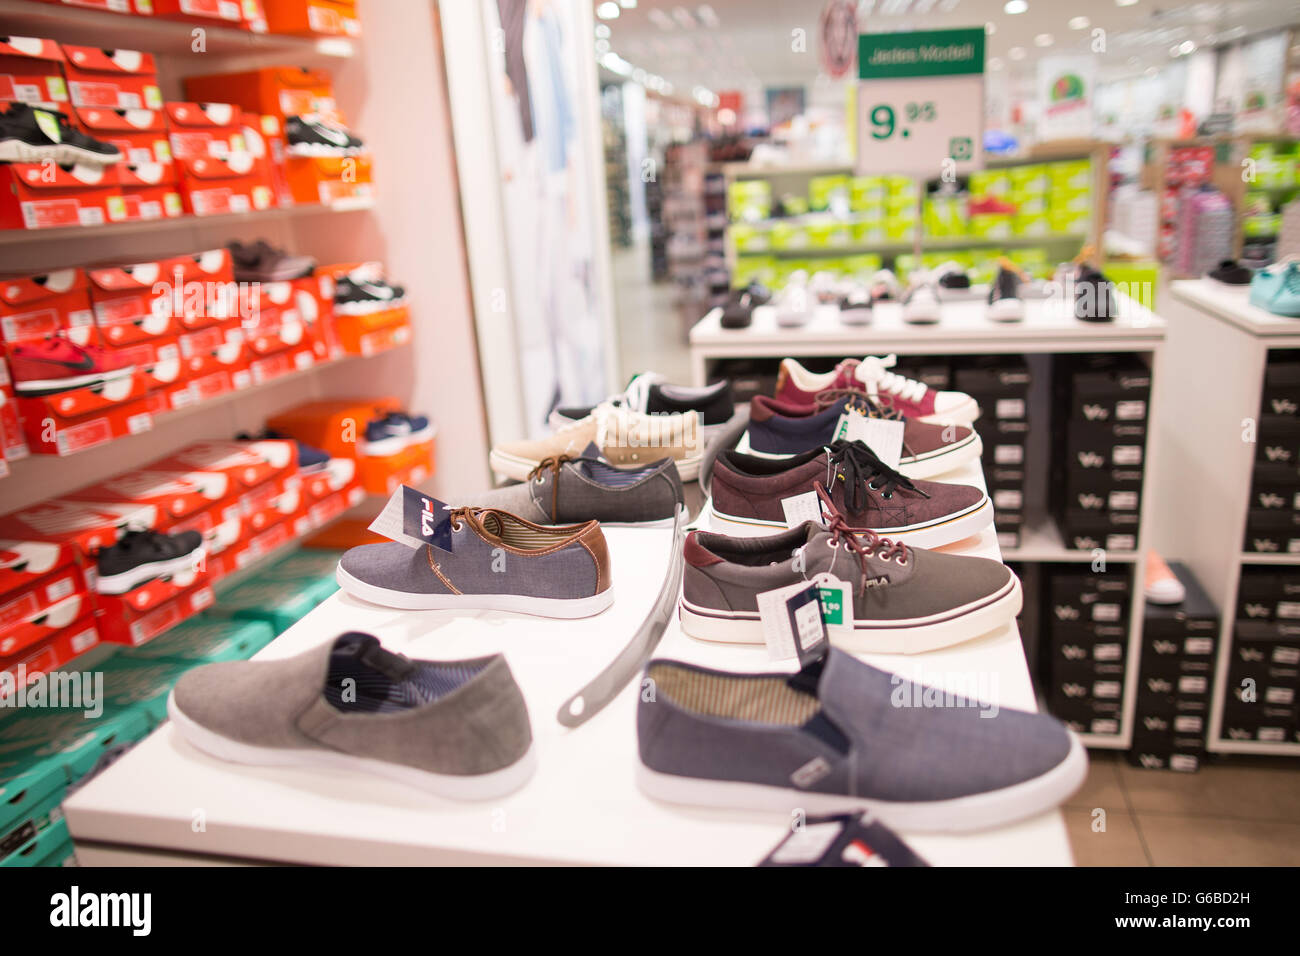 Duesseldorf, Germany. 24th June, 2016. Shoes on sale at a Deichmann store in Duesseldorf, Germany, 24 June 2016. PHOTO: MAJA HITIJ/dpa/Alamy Live News Stock Photo -